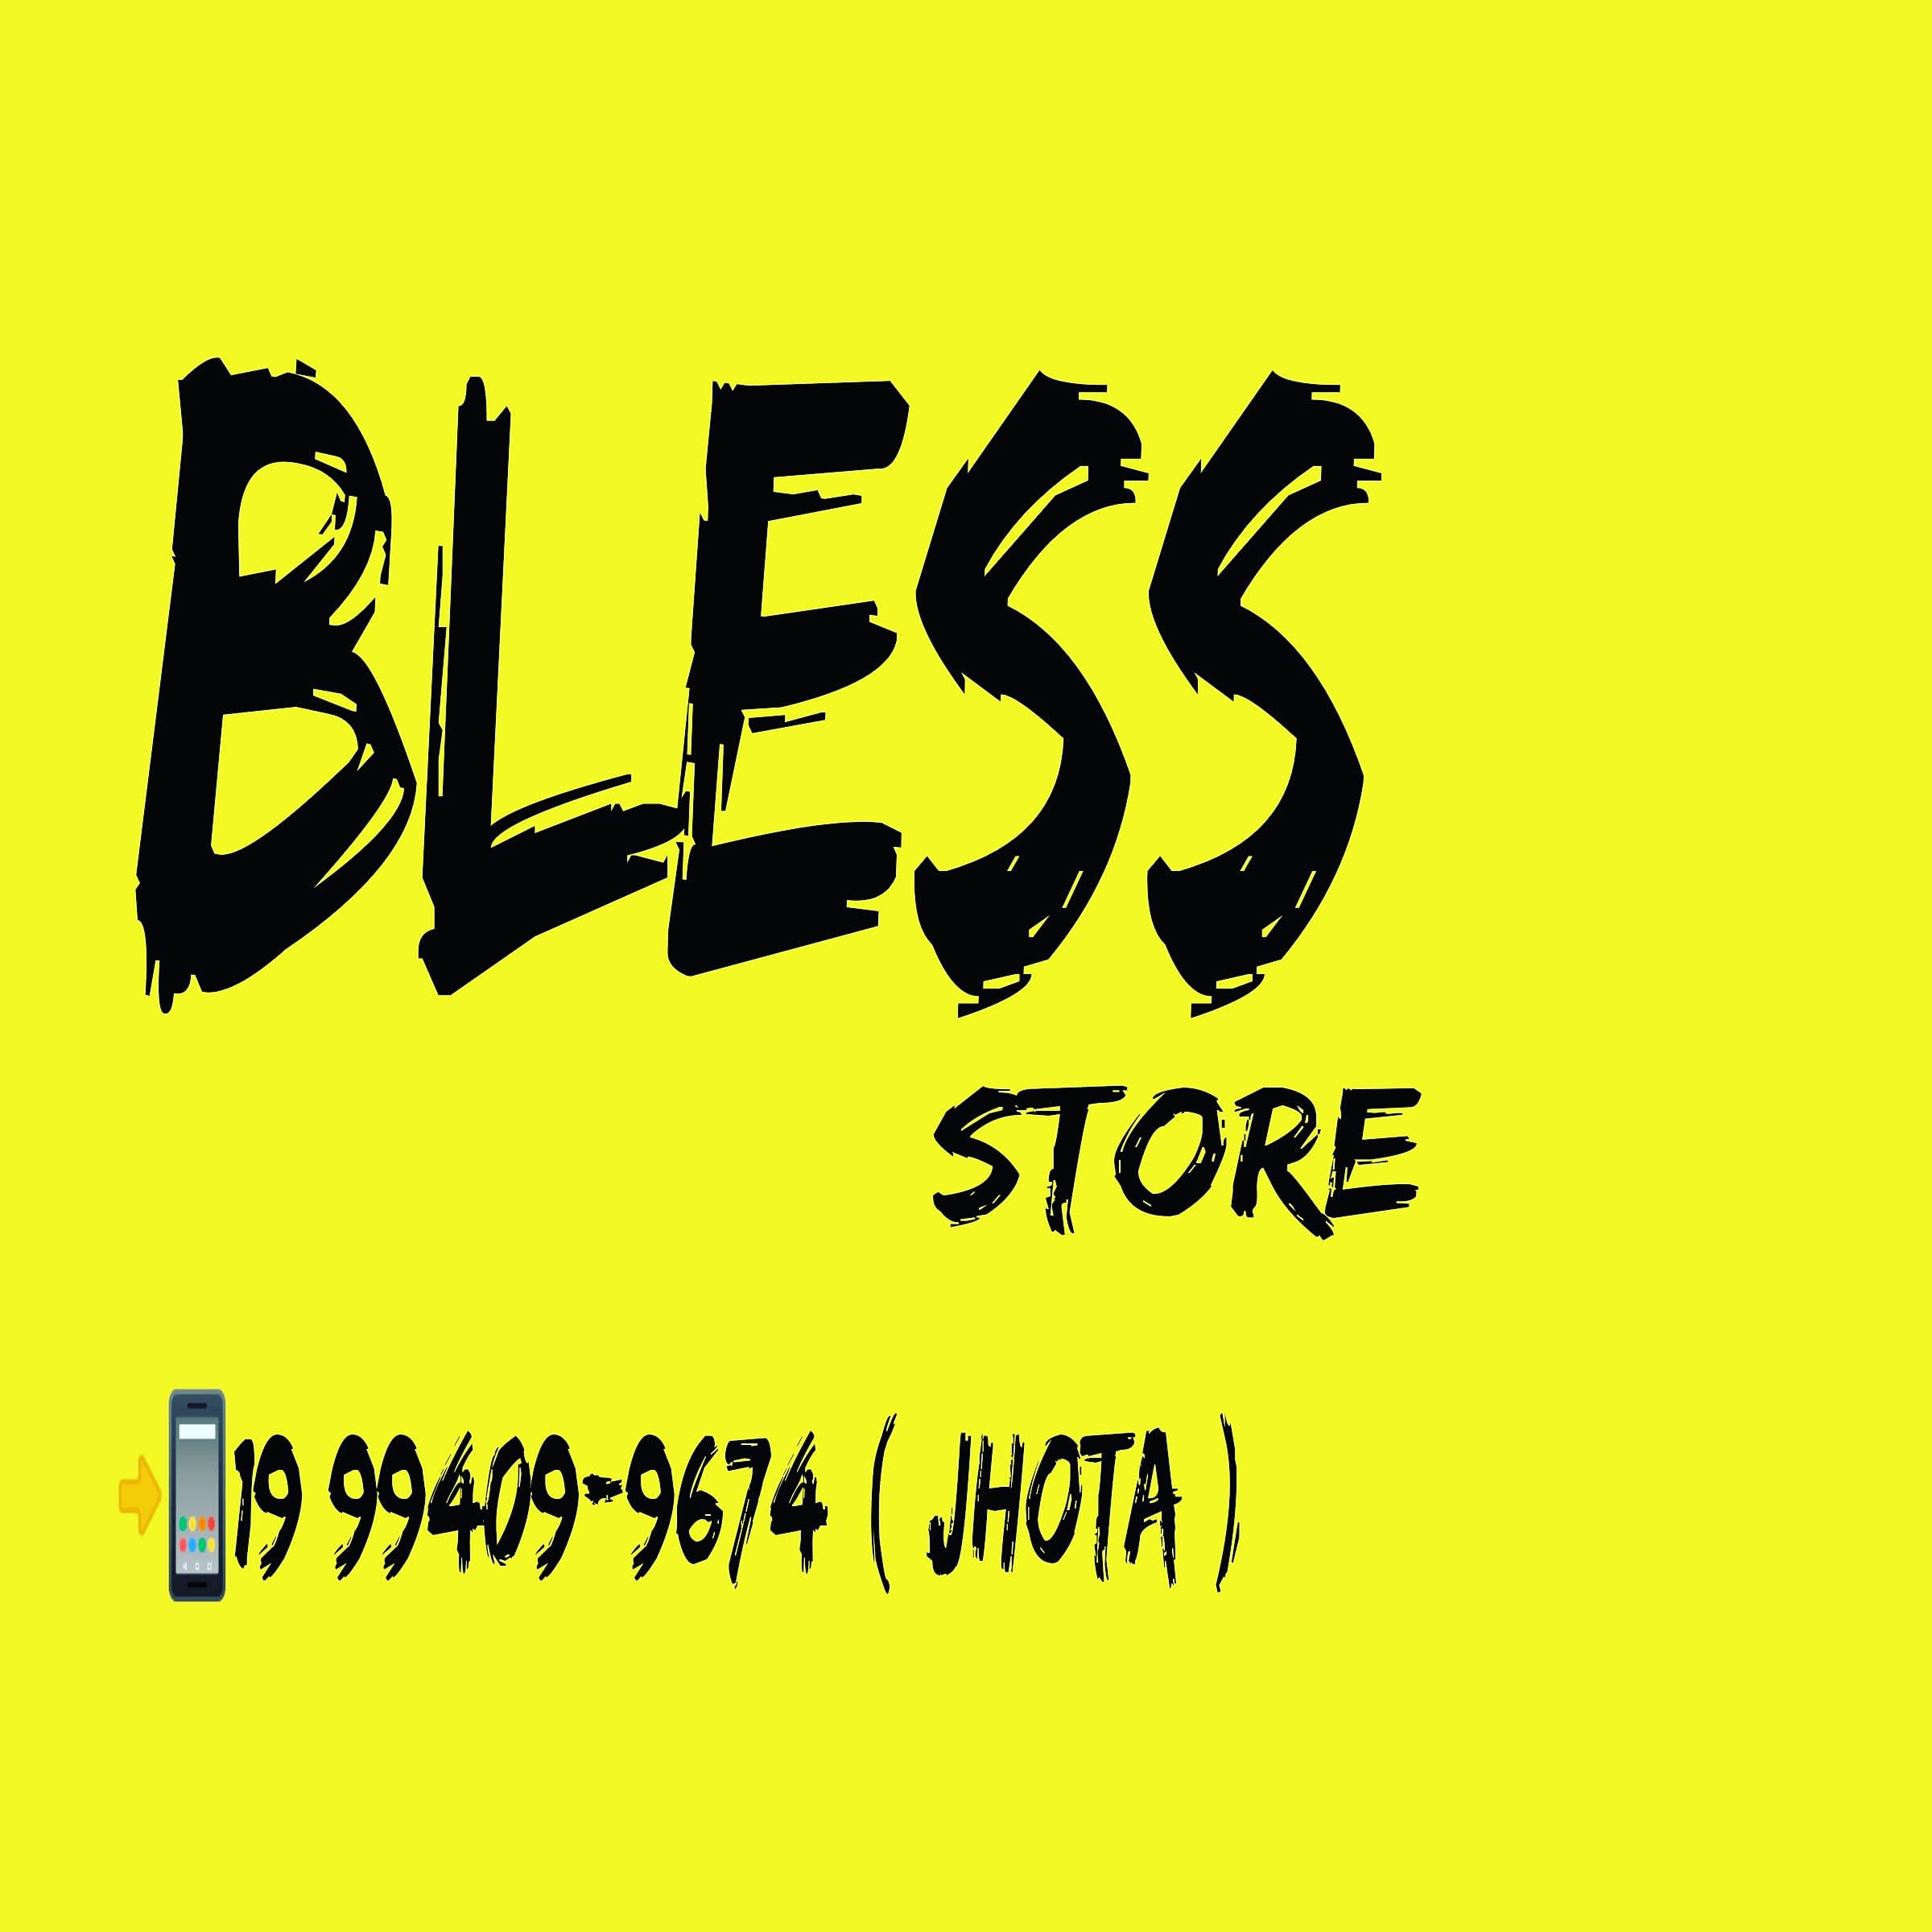 Bless Store